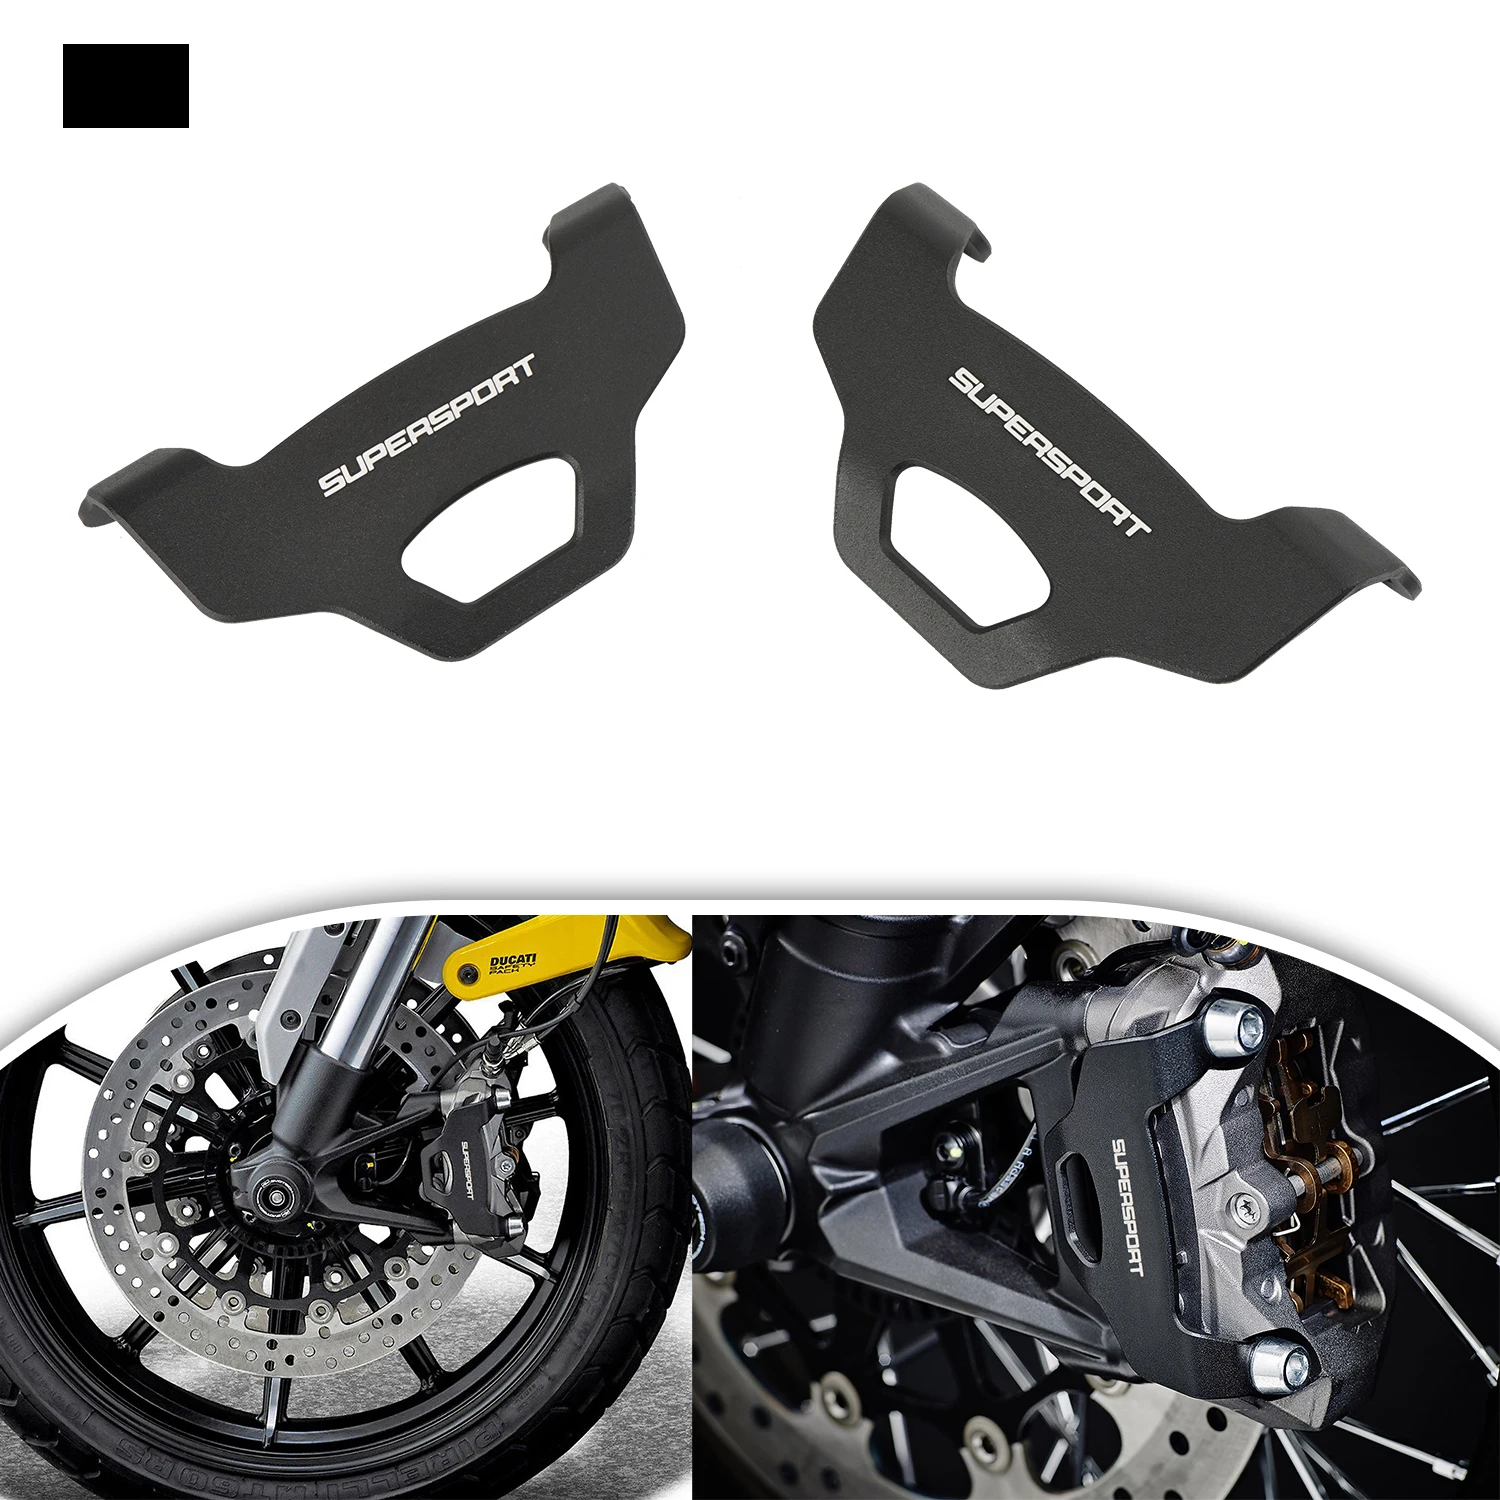 

Motocycle Front Brake Caliper Guard Cover For Ducati Supersport 939 2017 2018 2019 2020 2021 2022